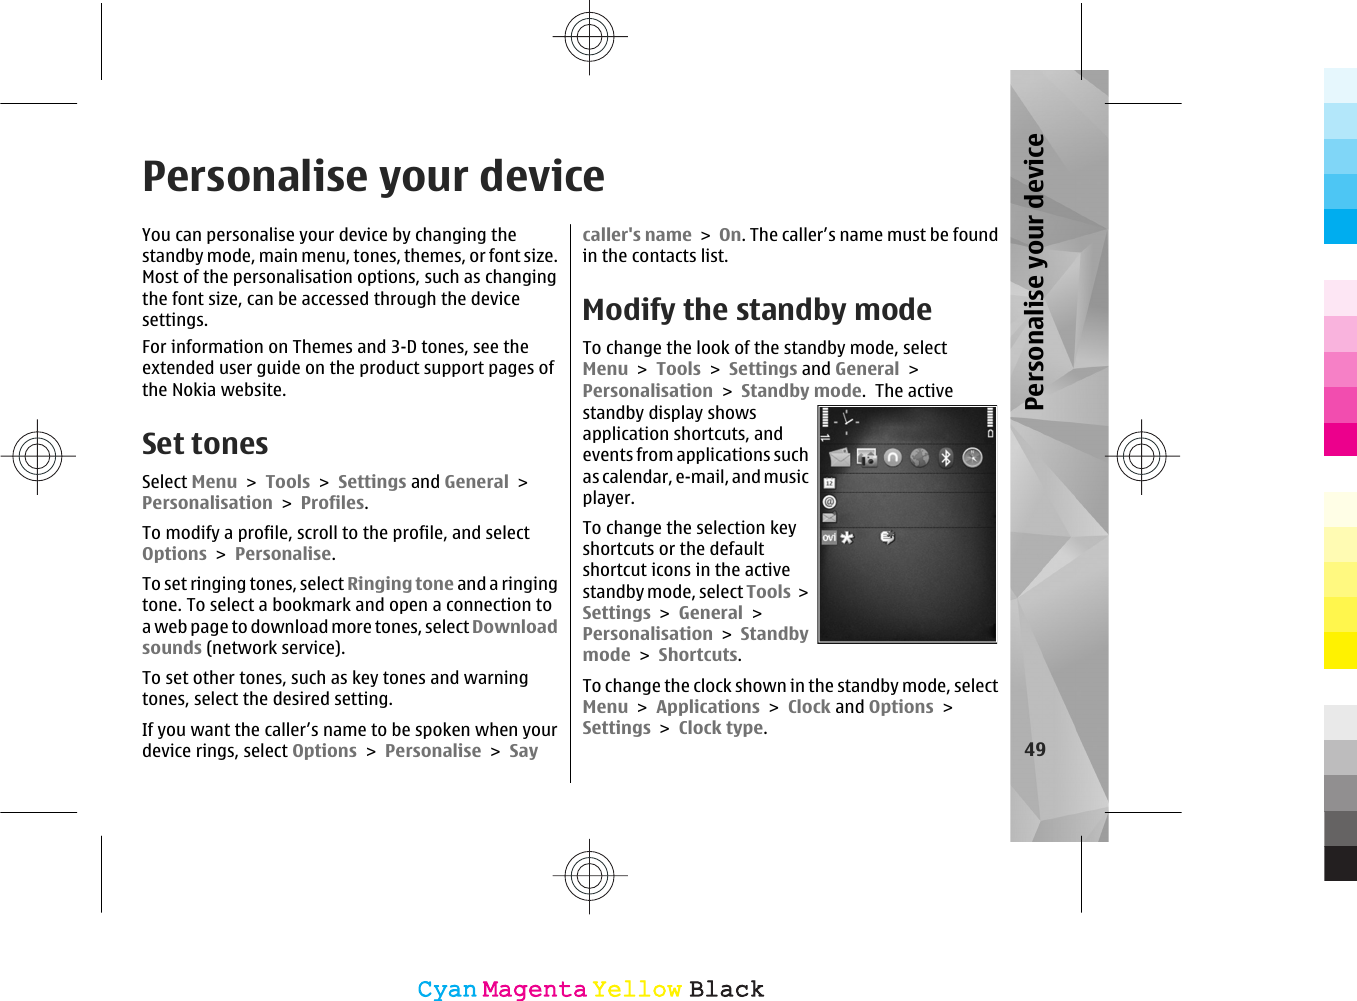 Personalise your deviceYou can personalise your device by changing thestandby mode, main menu, tones, themes, or font size.Most of the personalisation options, such as changingthe font size, can be accessed through the devicesettings.For information on Themes and 3-D tones, see theextended user guide on the product support pages ofthe Nokia website.Set tonesSelect Menu &gt; Tools &gt; Settings and General &gt;Personalisation &gt; Profiles.To modify a profile, scroll to the profile, and selectOptions &gt; Personalise.To set ringing tones, select Ringing tone and a ringingtone. To select a bookmark and open a connection toa web page to download m ore tones, select Downloadsounds (network service).To set other tones, such as key tones and warningtones, select the desired setting.If you want the caller’s name to be spoken when yourdevice rings, select Options &gt; Personalise &gt; Saycaller&apos;s name &gt; On. The caller’s name must be foundin the contacts list.Modify the standby modeTo change the look of the standby mode, selectMenu &gt; Tools &gt; Settings and General &gt;Personalisation &gt; Standby mode.  The activestandby display showsapplication shortcuts, andevents from applications suchas calendar, e-mail, and musicplayer.To change the selection keyshortcuts or the defaultshortcut icons in the activestandby mode, select Tools &gt;Settings &gt; General &gt;Personalisation &gt; Standbymode &gt; Shortcuts.To change the clock shown in the standby mode, selectMenu &gt; Applications &gt; Clock and Options &gt;Settings &gt; Clock type. 49Personalise your deviceCyanCyanMagentaMagentaYellowYellowBlackBlack